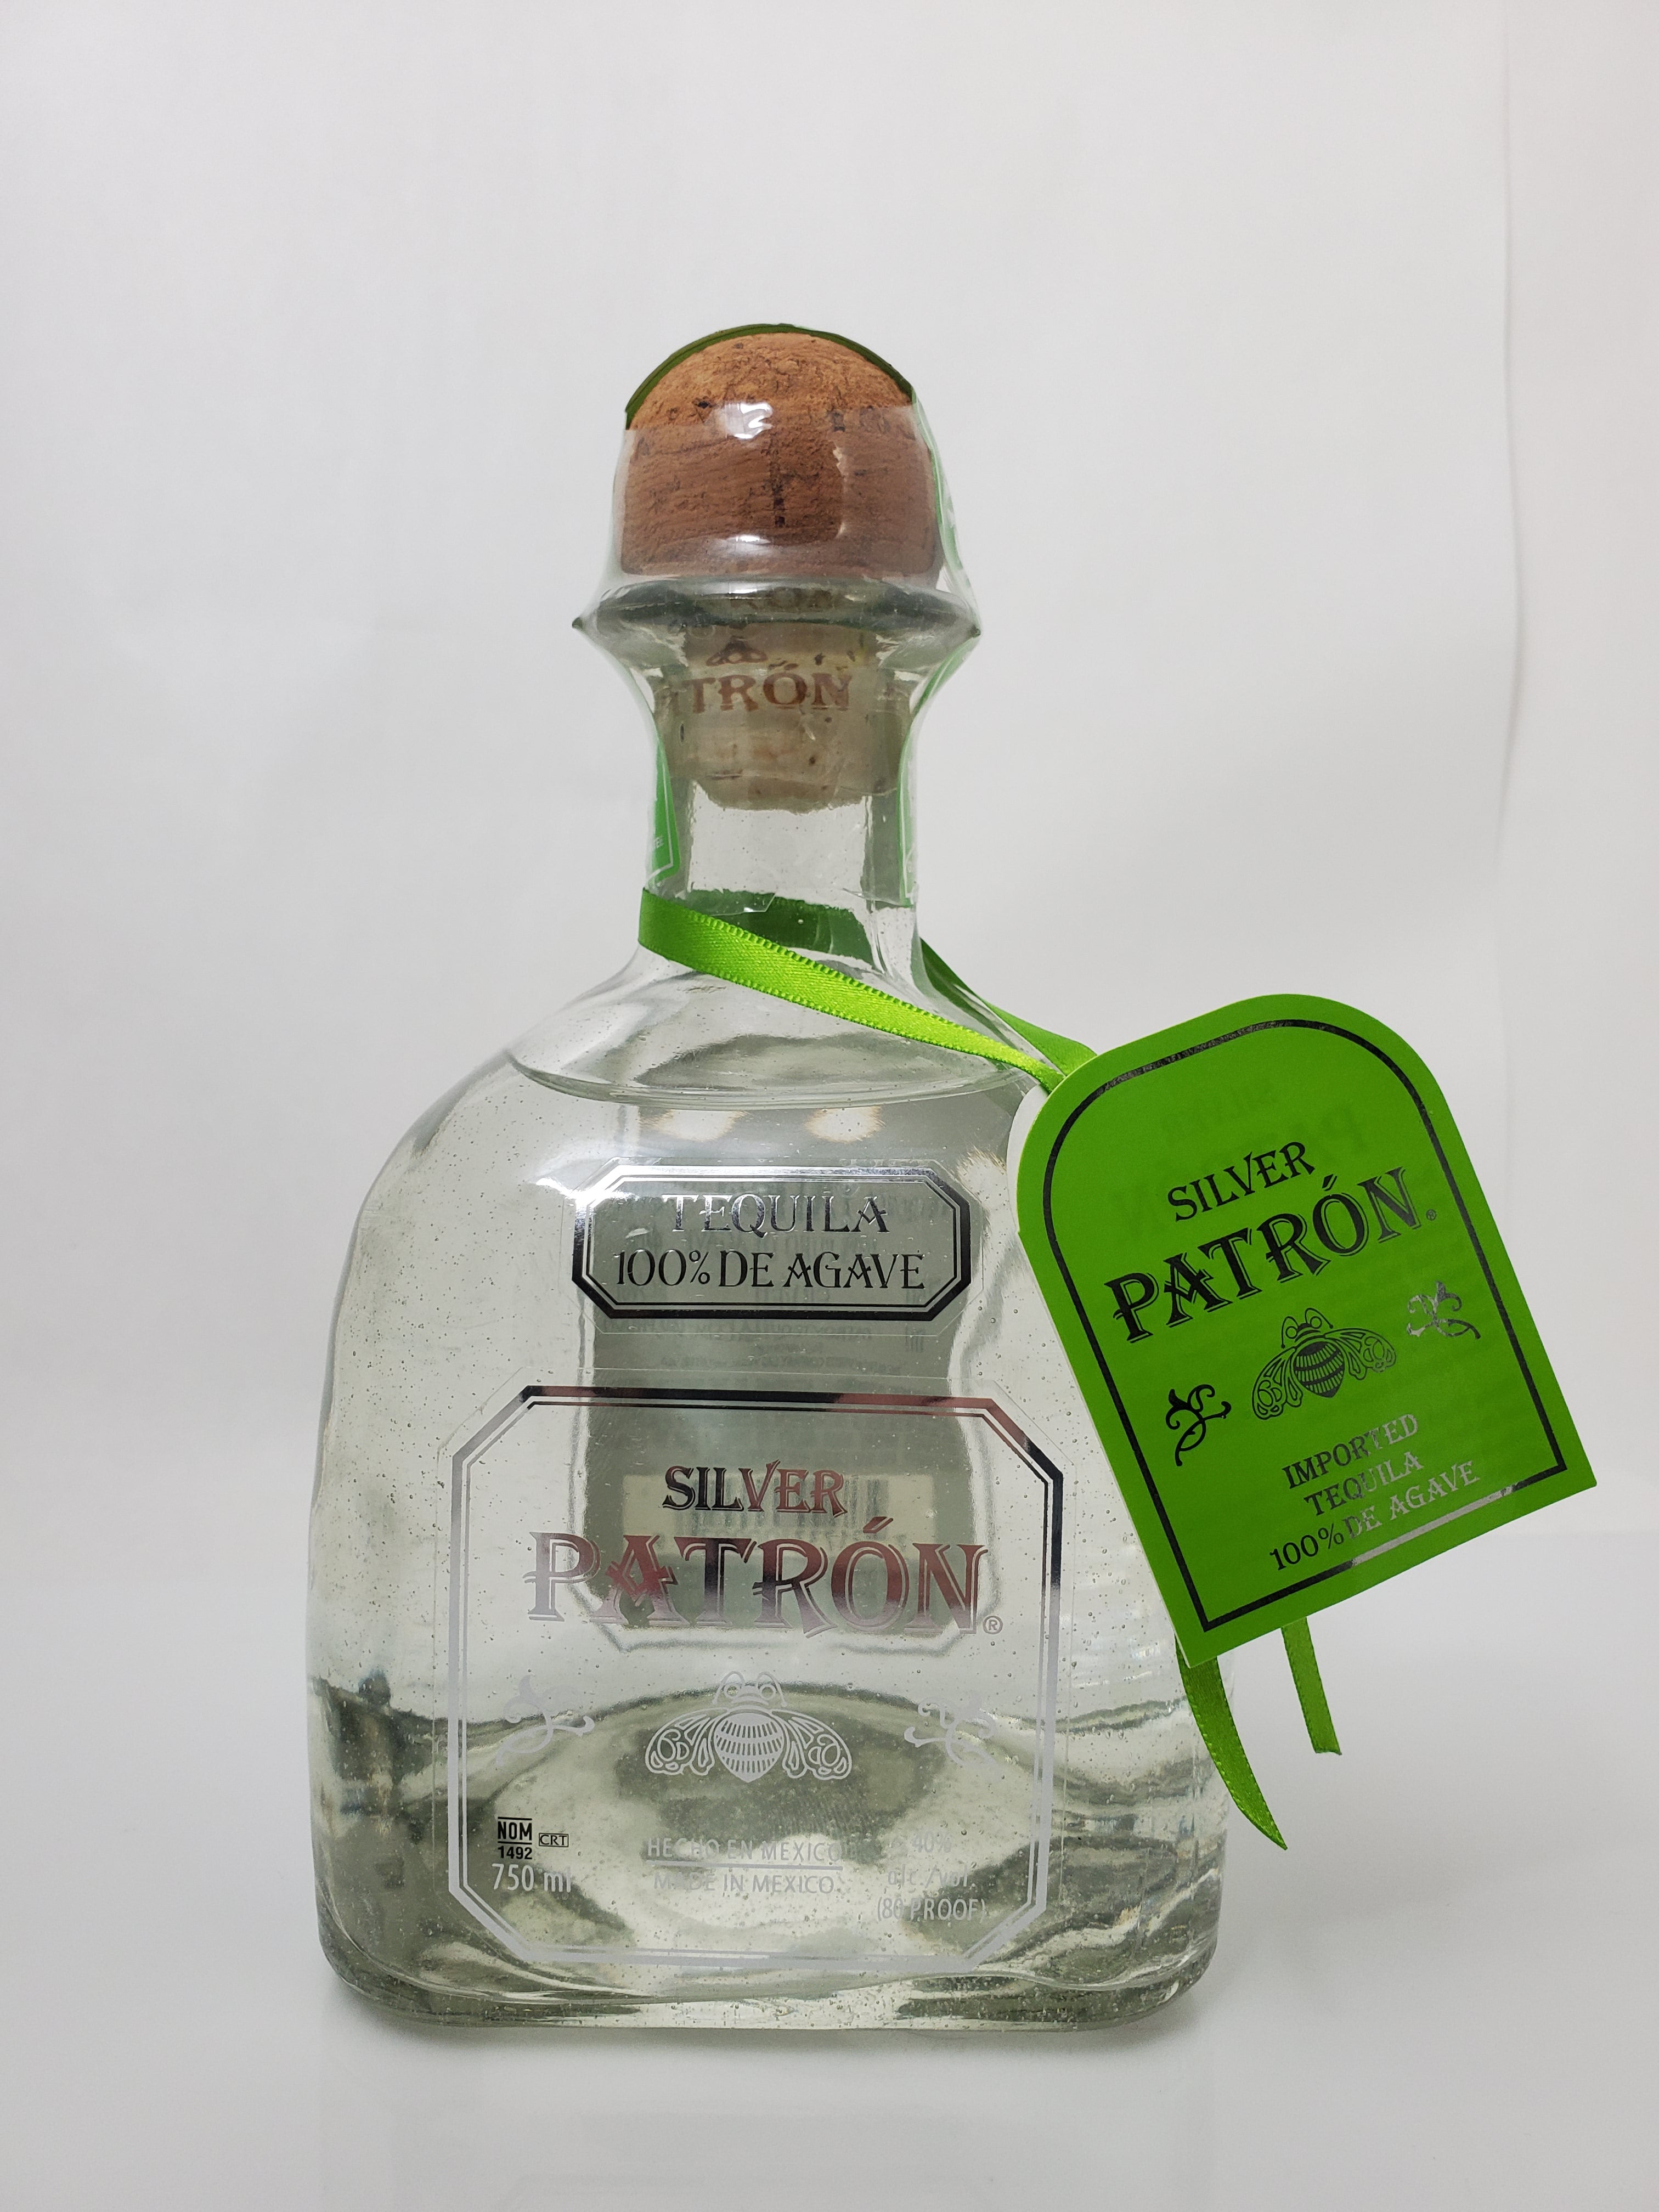 Patron Silver Tequila 750 ml